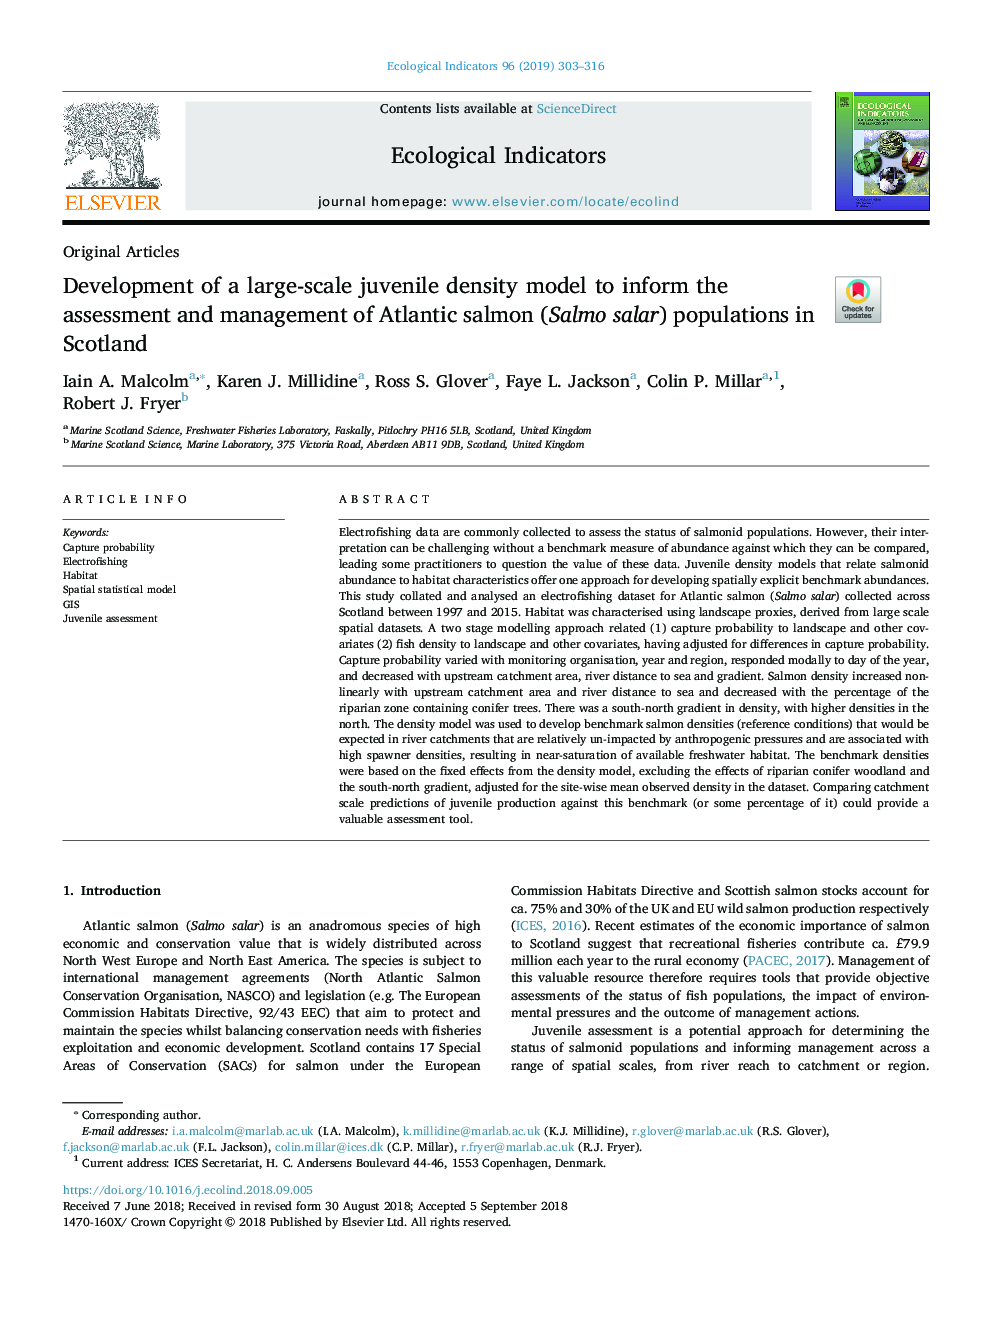 Development of a large-scale juvenile density model to inform the assessment and management of Atlantic salmon (Salmo salar) populations in Scotland